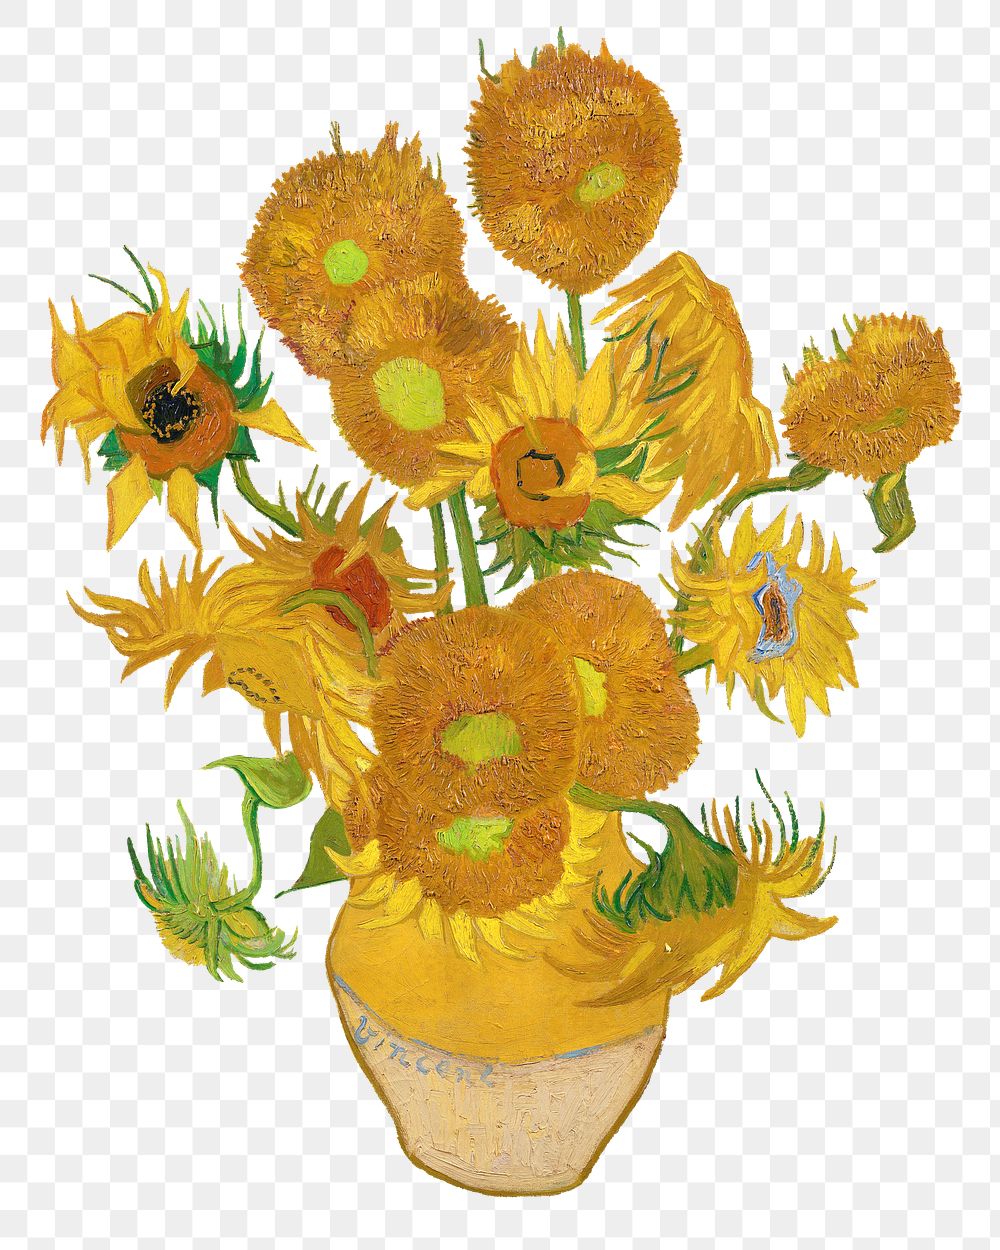 Png Vincent Van Gogh&rsquo;s Sunflowers sticker, famous flower artwork on transparent background, remastered by rawpixel